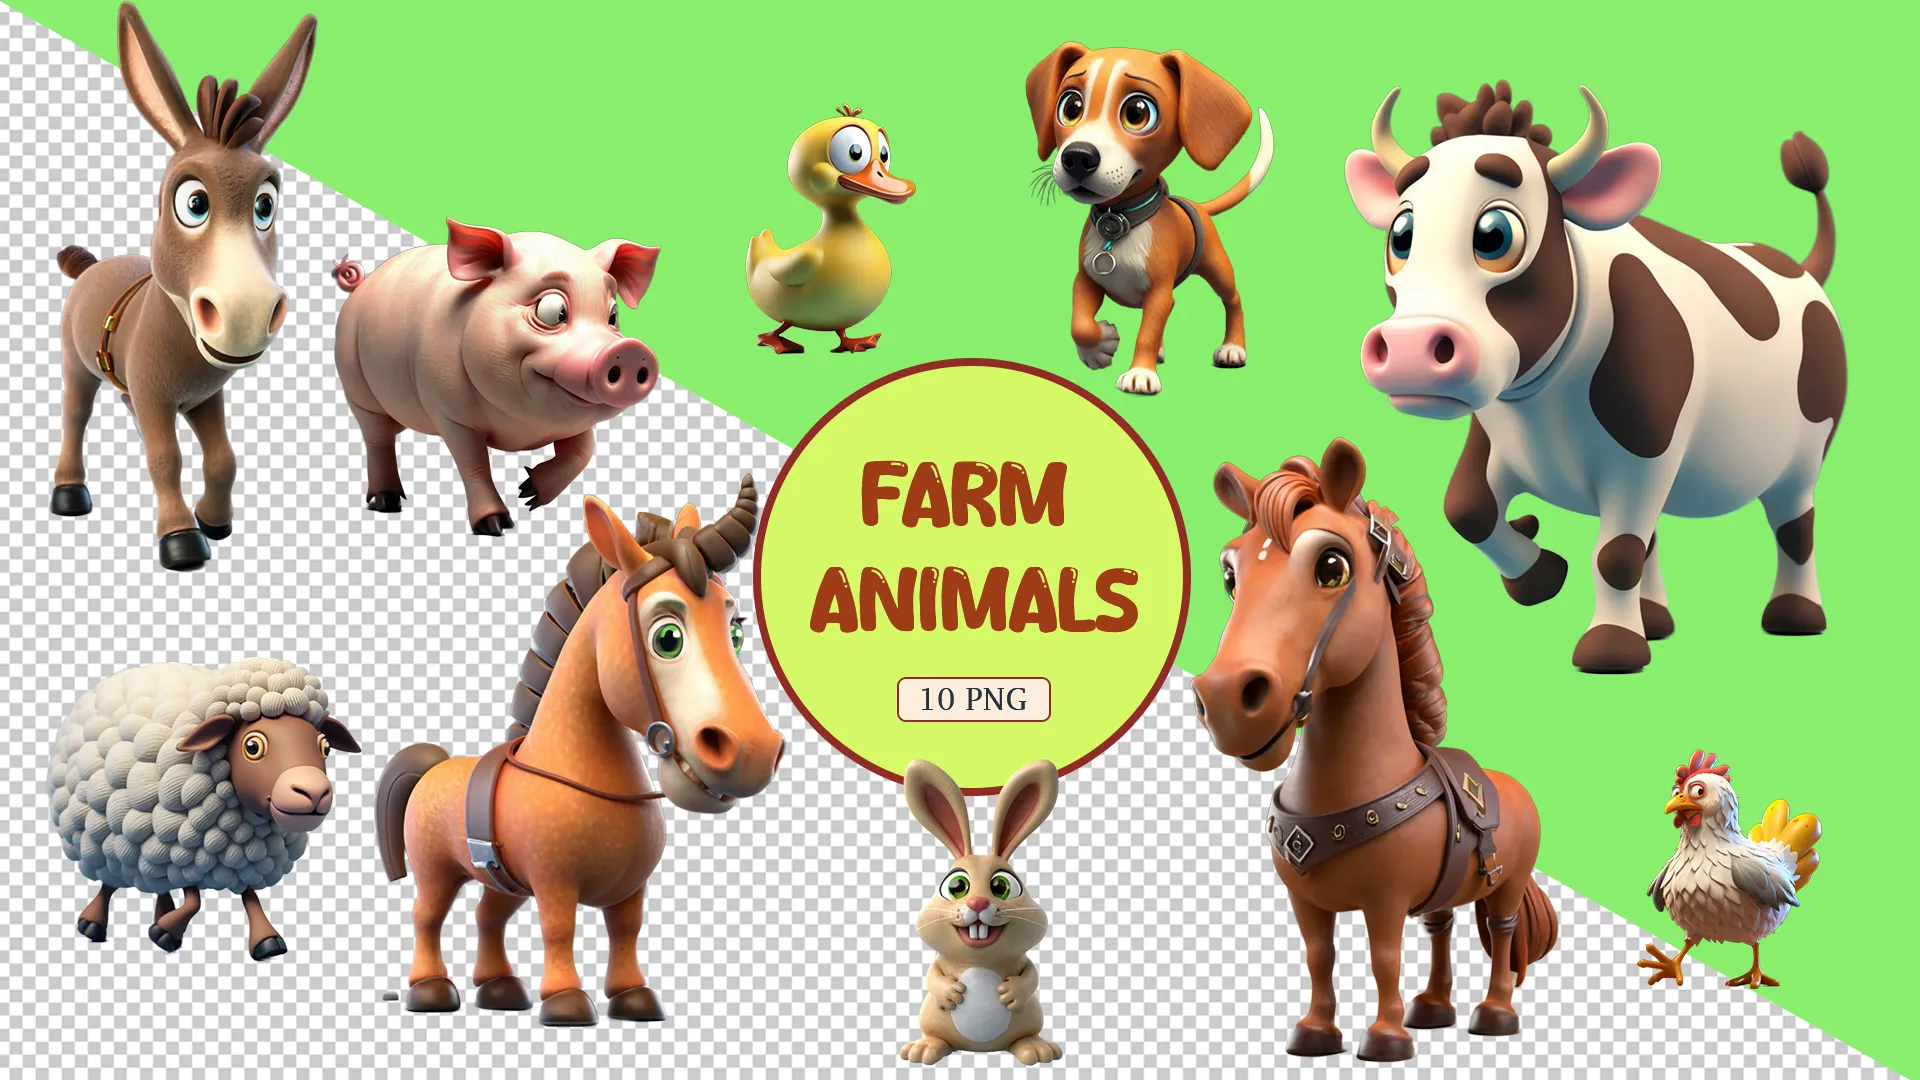 Cute and Colorful Farm Animals Set Pack image